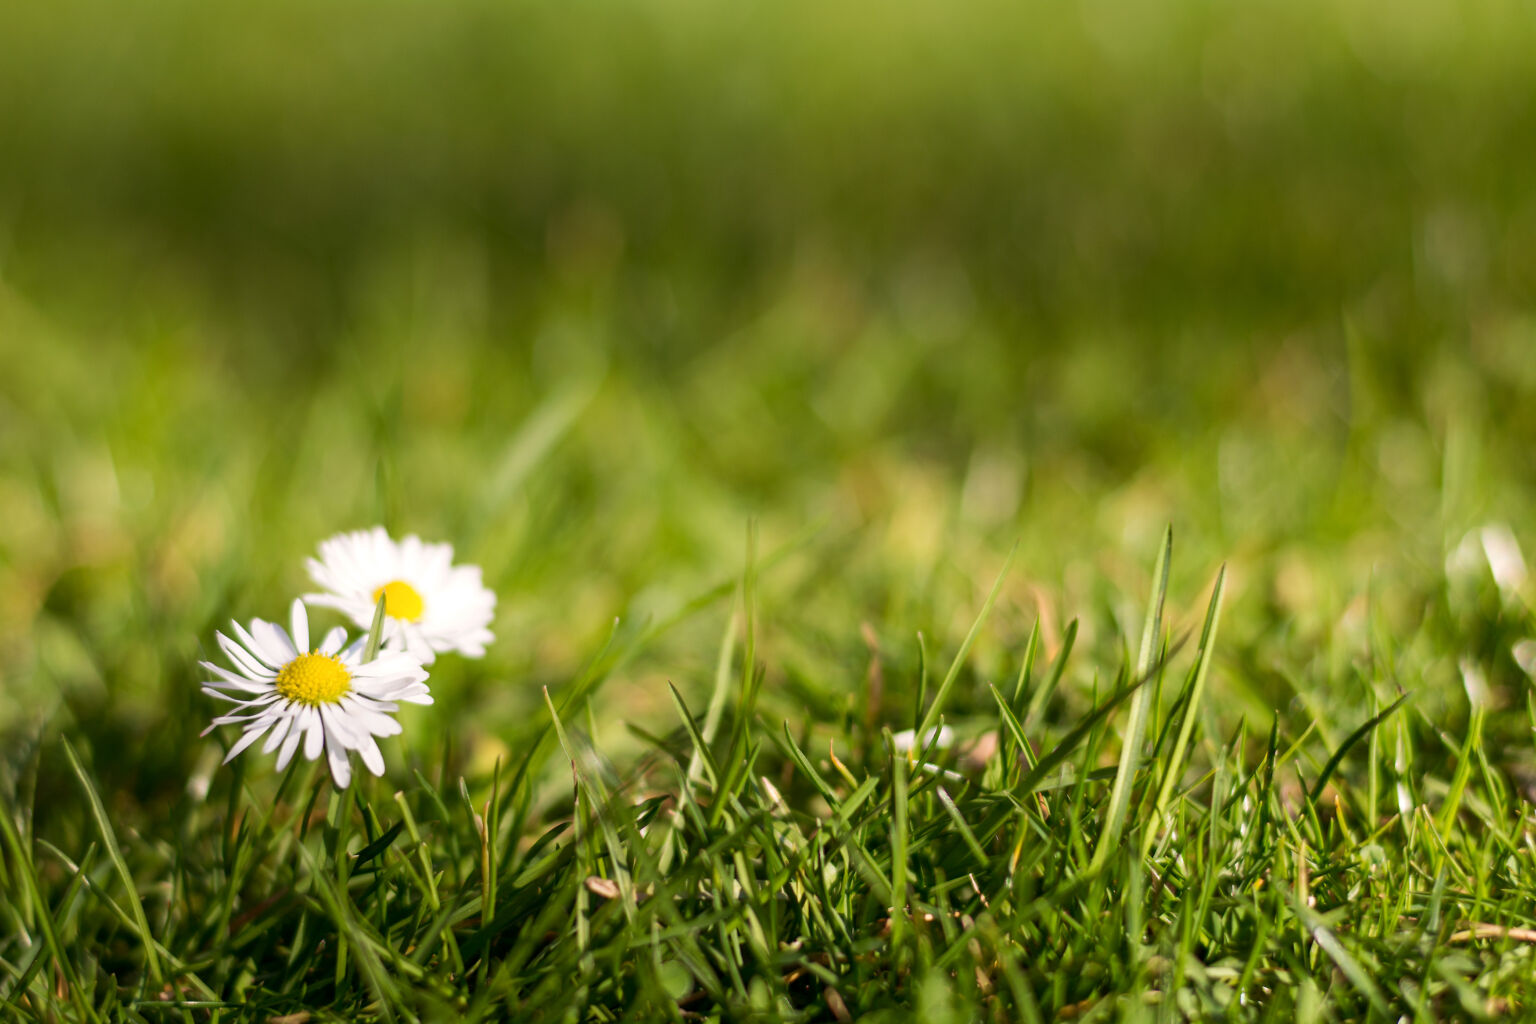 Two Daisies in the Grass | Copyright-free photo (by M. Vorel) | LibreShot